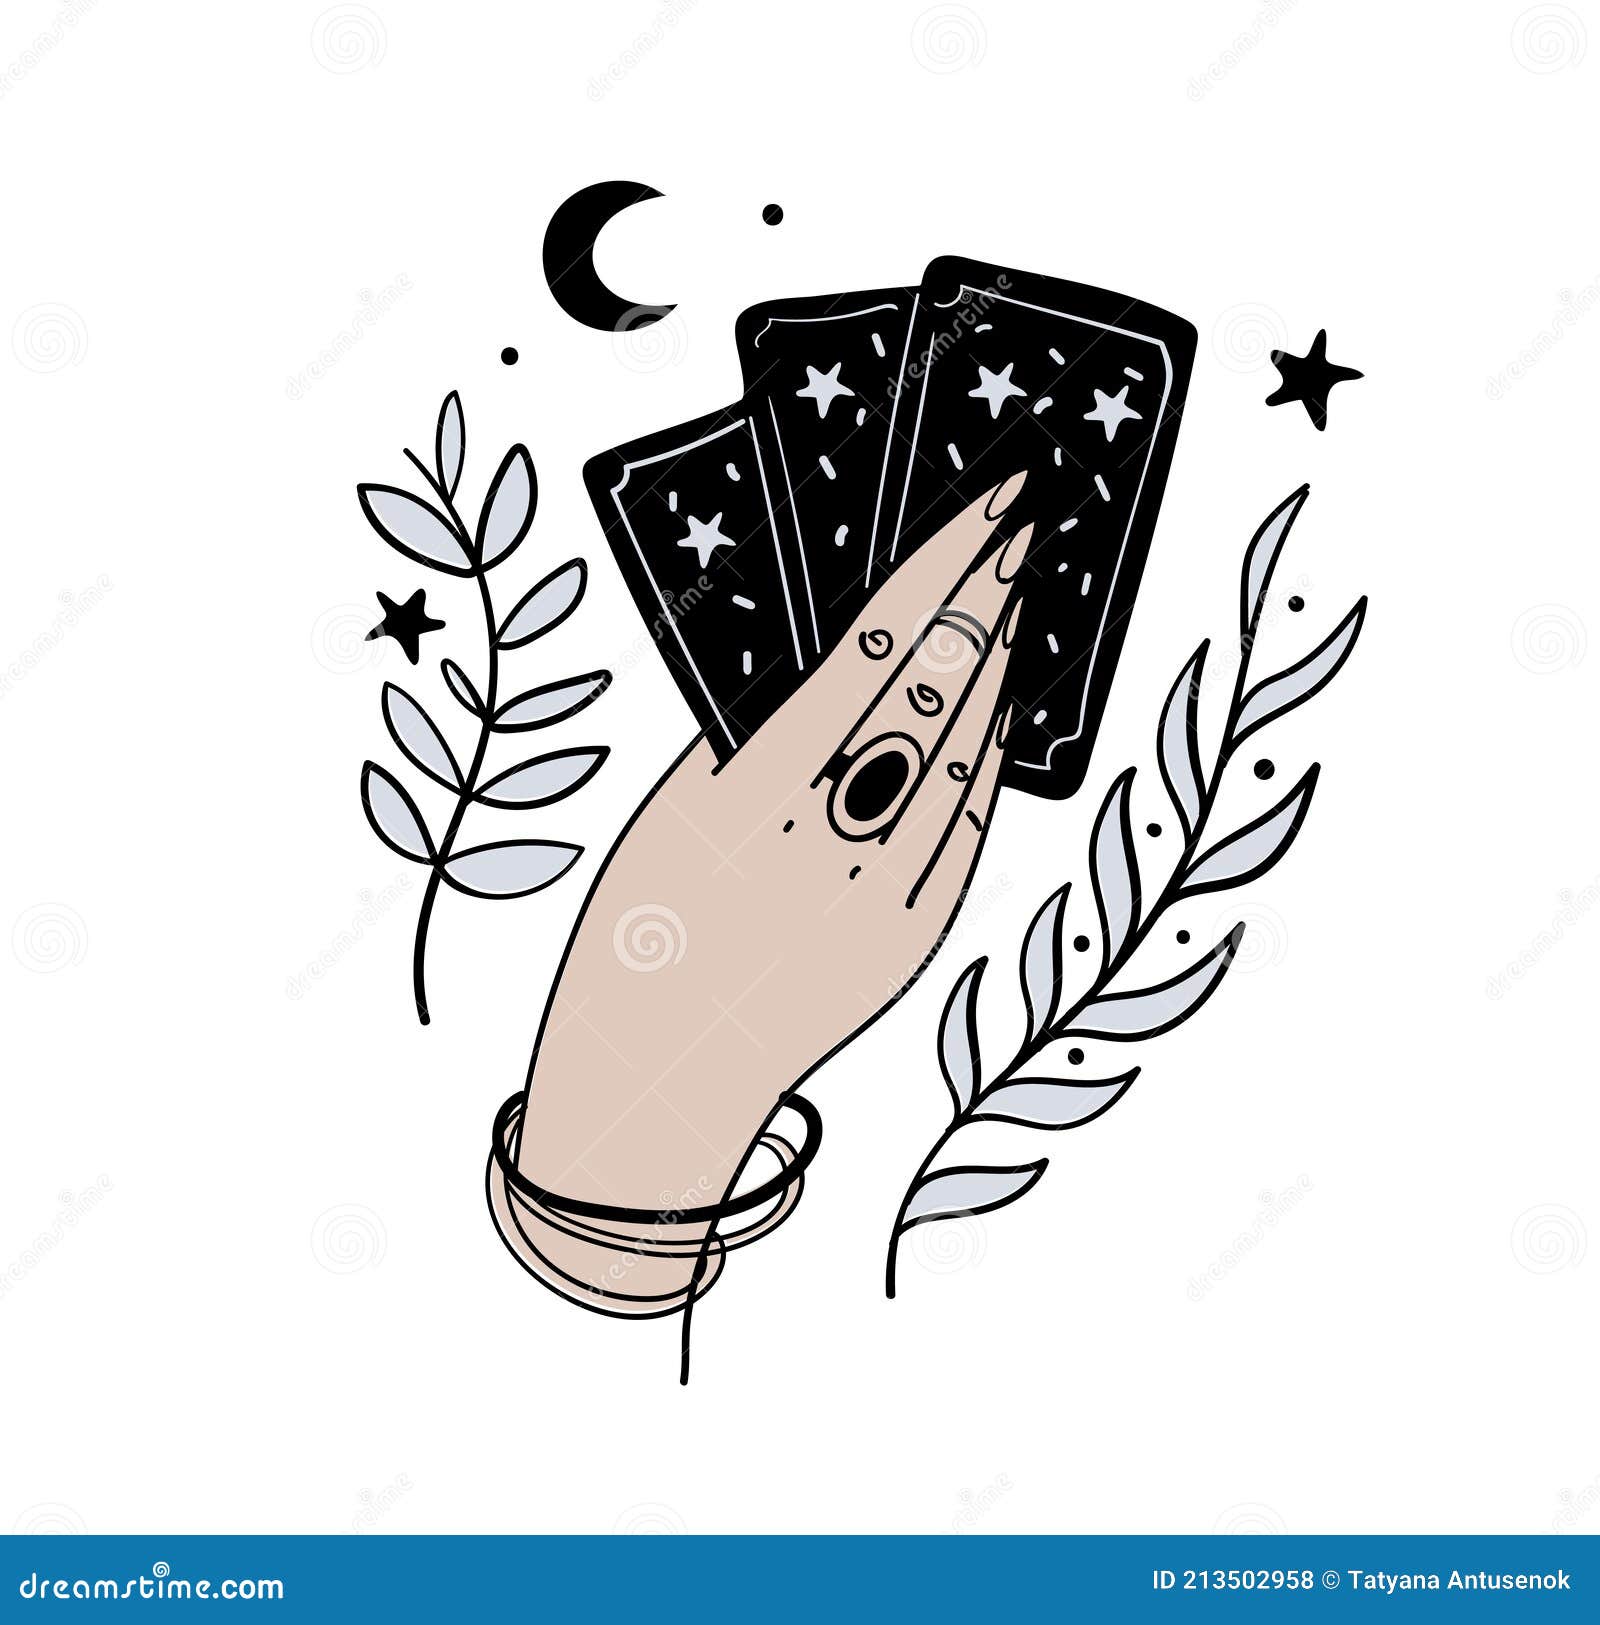 Female Hand Holds Magic Tarot Cards, Boho Tattoo, Symbol of Fortune-telling and Prediction, Icon for Witch, Astrology Stock Vector - Illustration of white, rays: 213502958